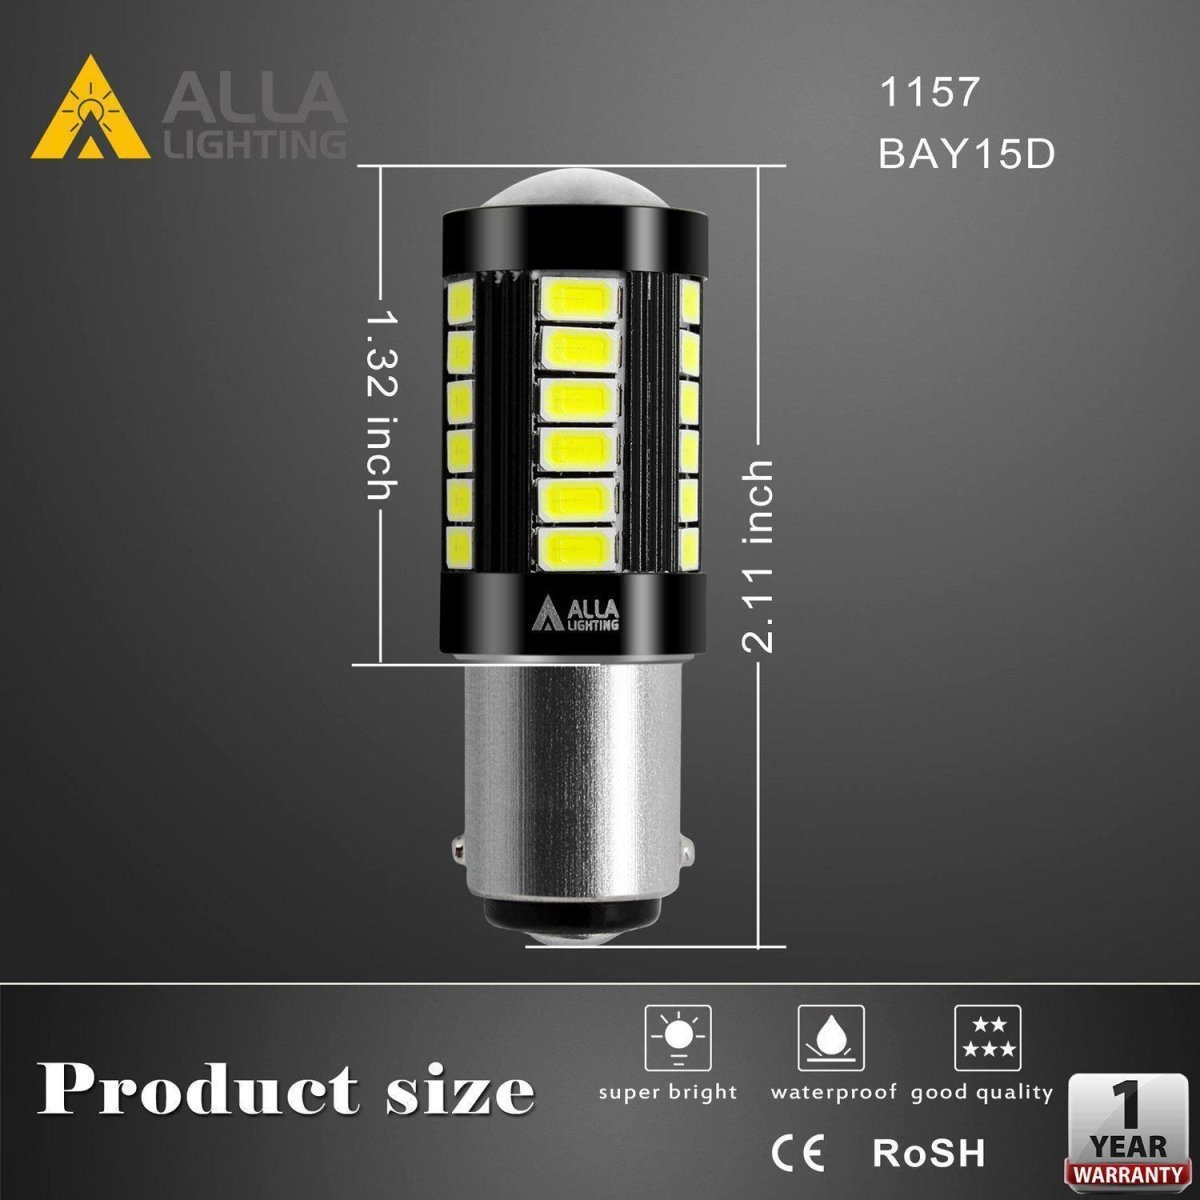 BA15D 1004 1142 LED Lights Bulbs for Boat, Cars, Trailers, Campers, RVs -Alla Lighting